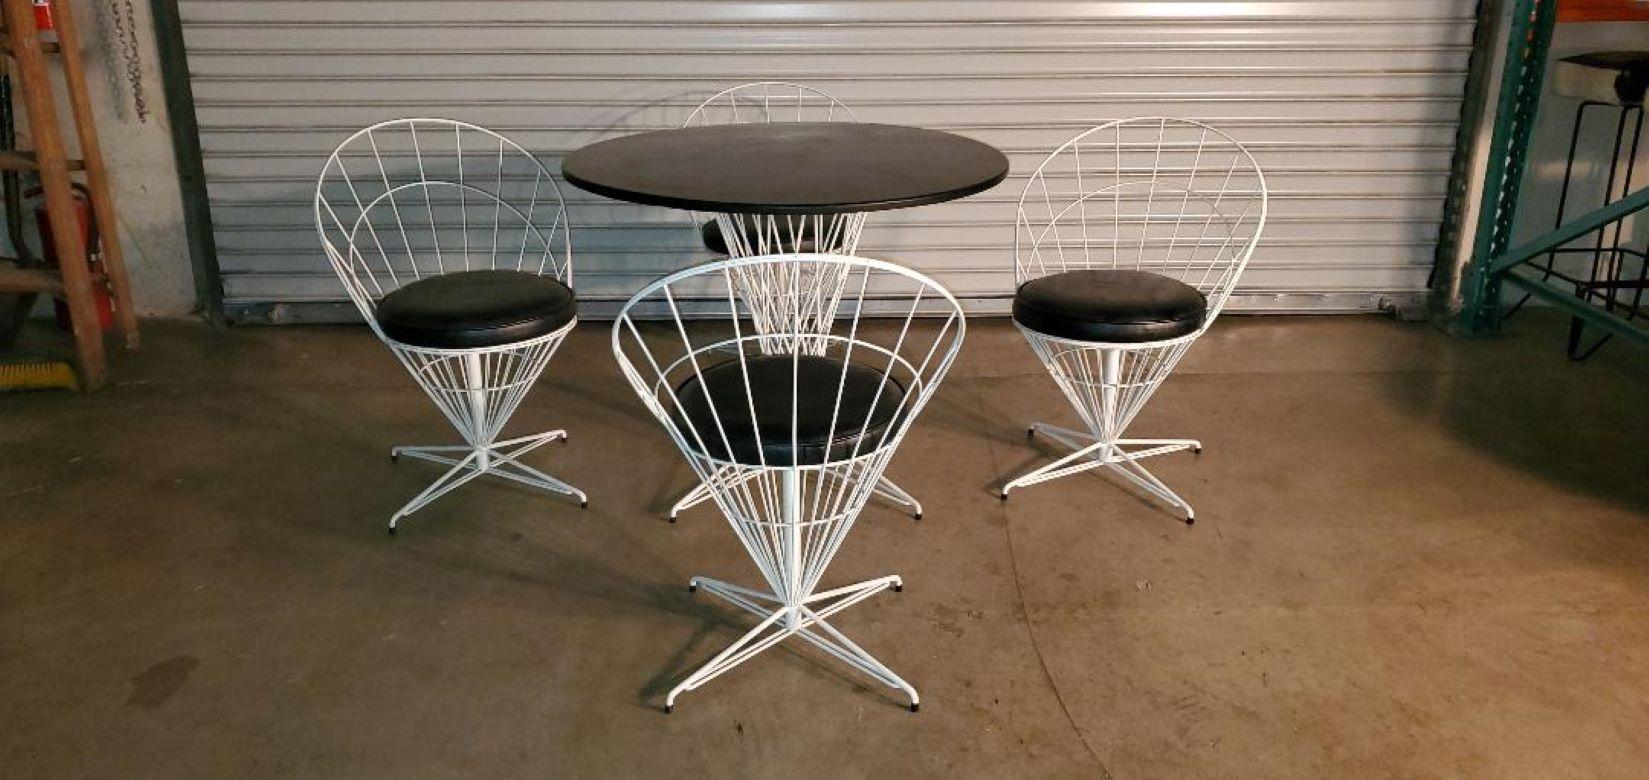 Vintage Mid-Century Modern 5 Piece Open Metal Wire Cone dining set In The Style Or Likeness of Verner Panton.

This 5 Piece White And Black Open Metal Wire Cone Dining Set Is In Excellent Vintage Condition. Four White Open Metal Wire Cone Swivel